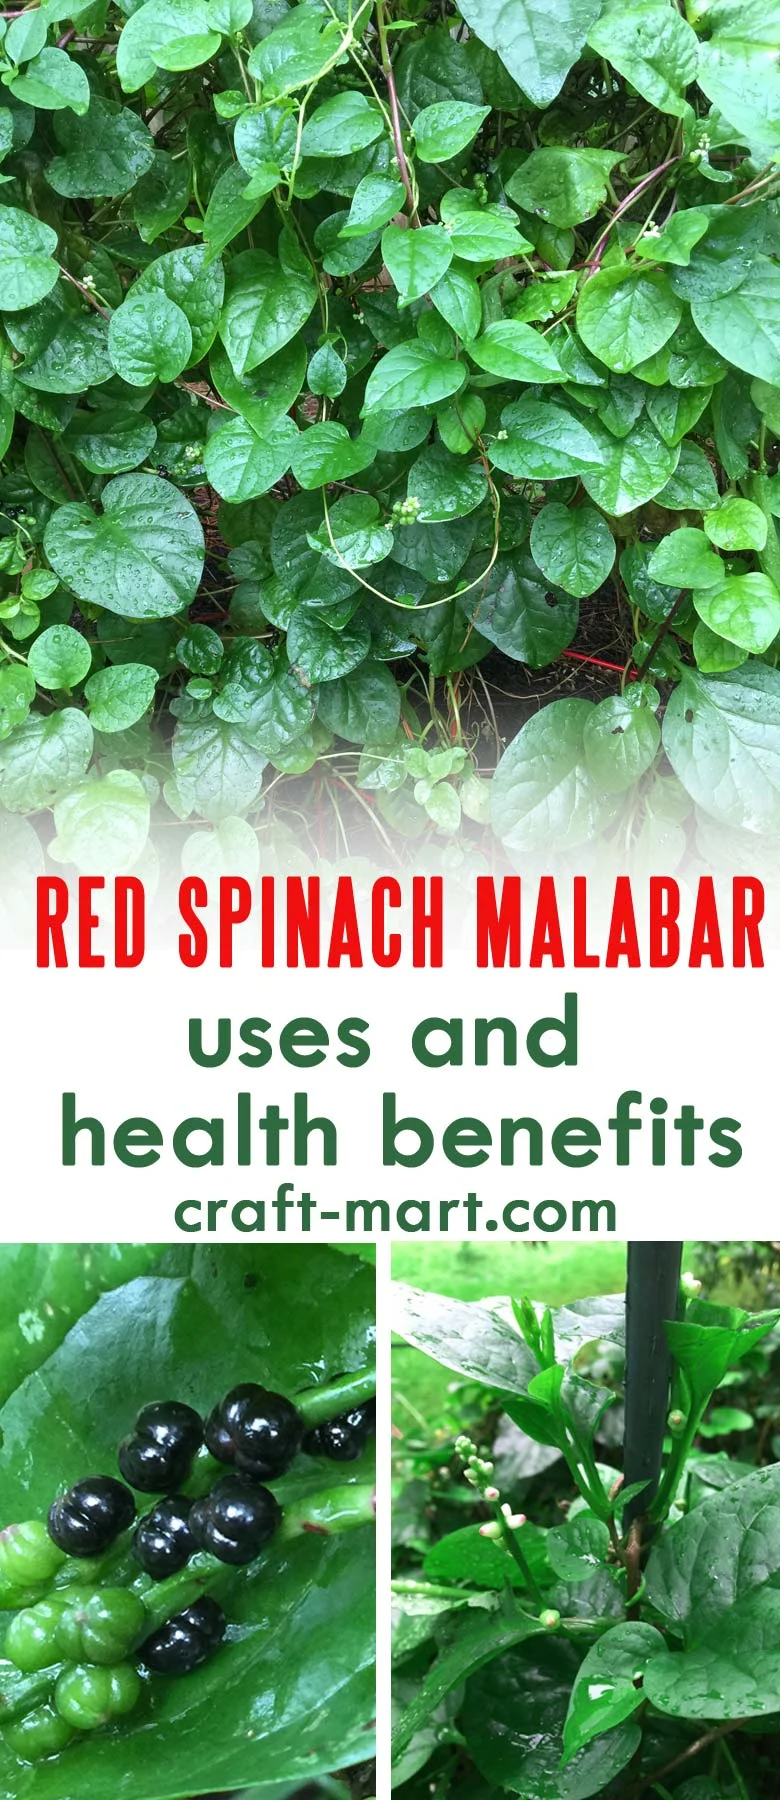 Also known as Ceylon spinach, climbing spinach, gui, acelga trapadora, bratana, libato, vine spinach and Malabar nightshade, Red Spinach Malabar is a member of the Basellaceae family. Meal prep ideas for keto diet #growingredspinachmalabar 